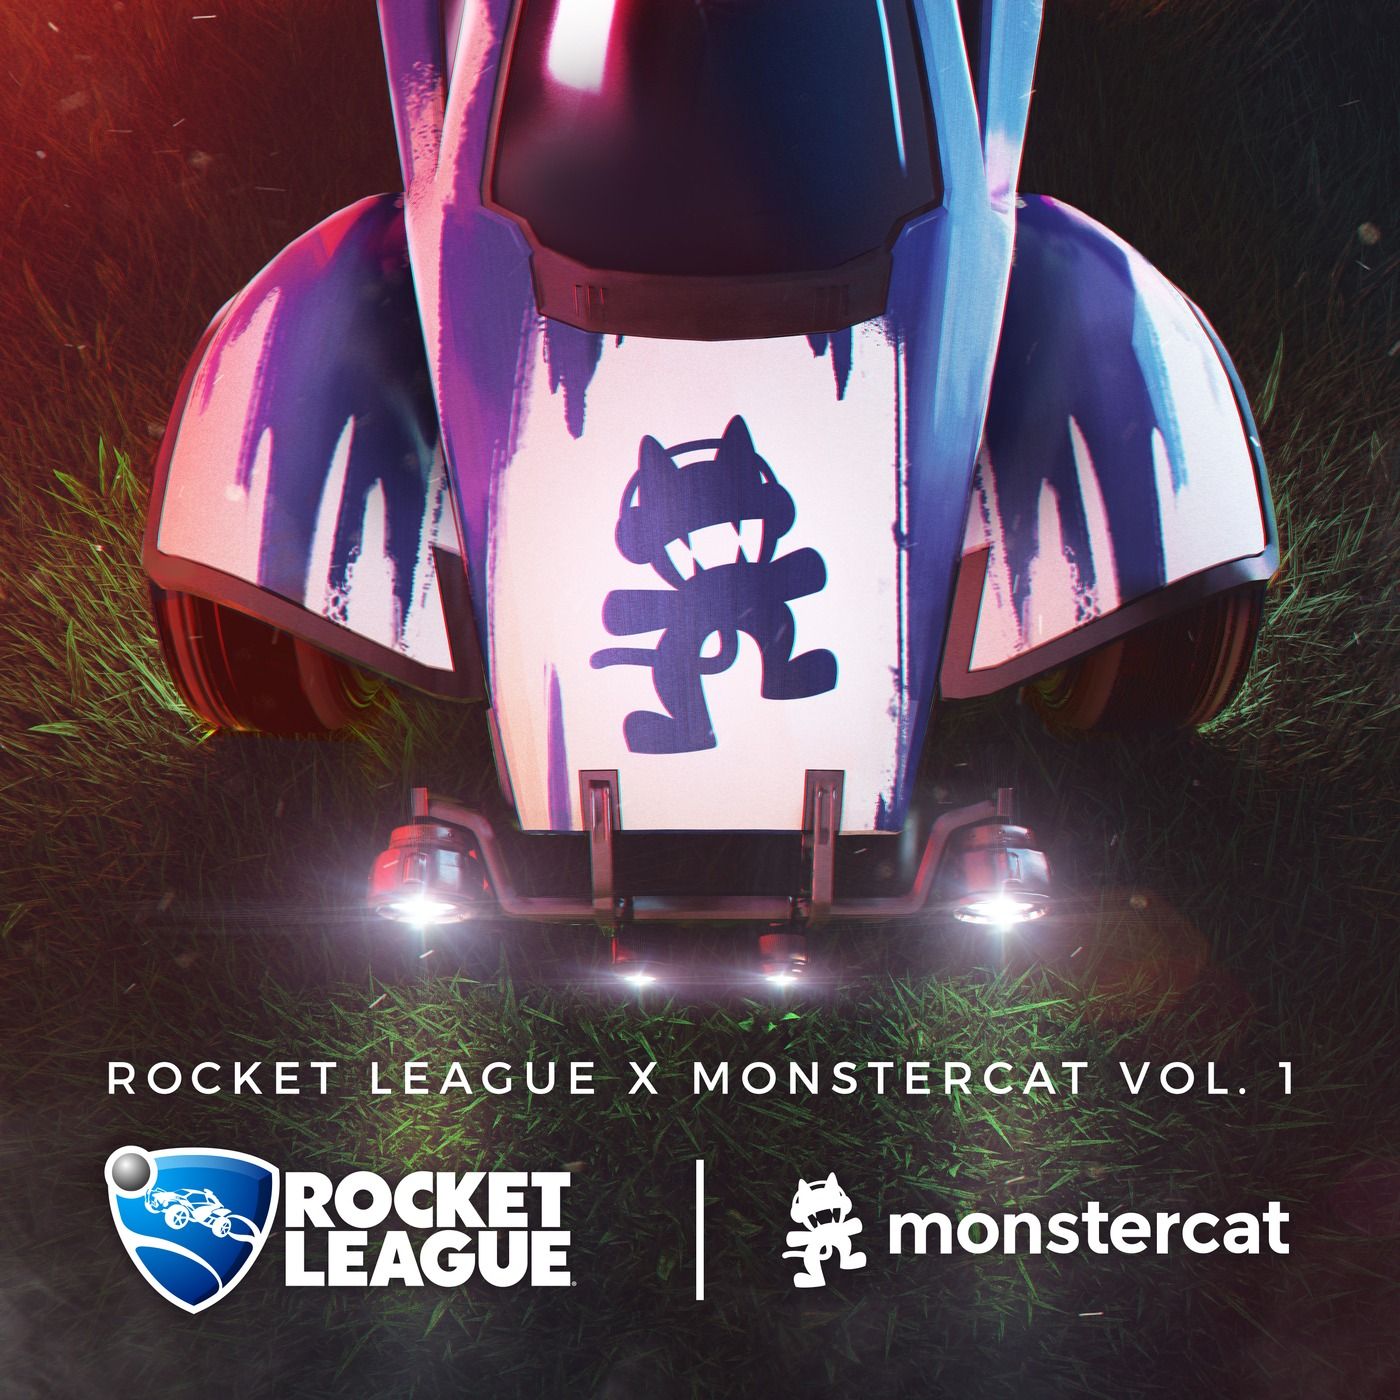 Rameses B - Play To Win (Feat. Holly Drummond) [Monstercat Release] (신비, 몽환, 비트, 격렬, 게임, OST)